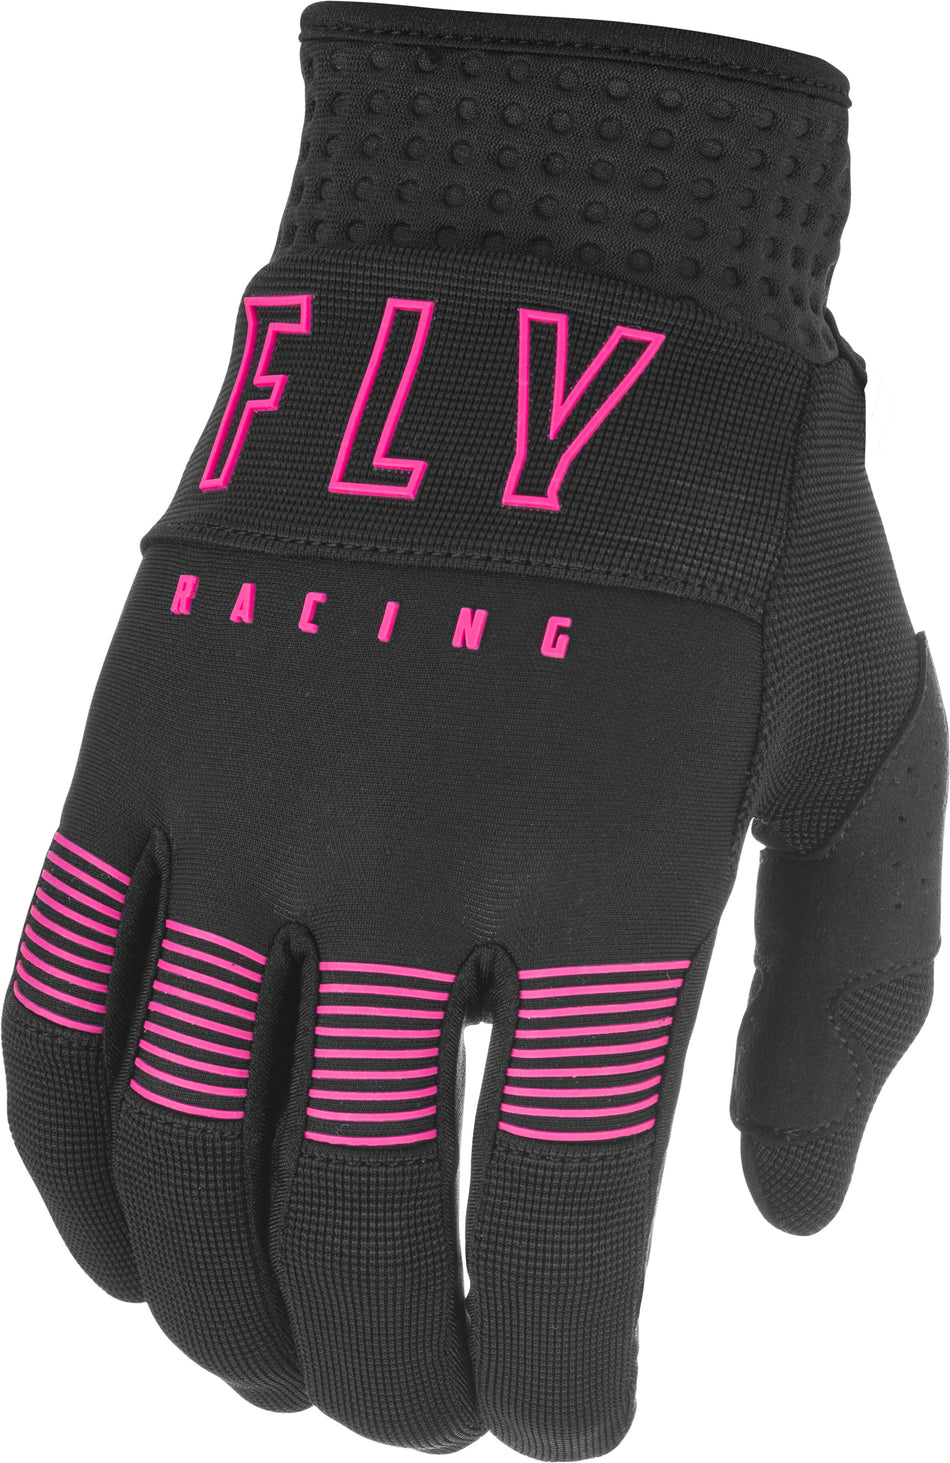 FLY RACING F-16 Gloves Black/Pink Sz 07 374-91807